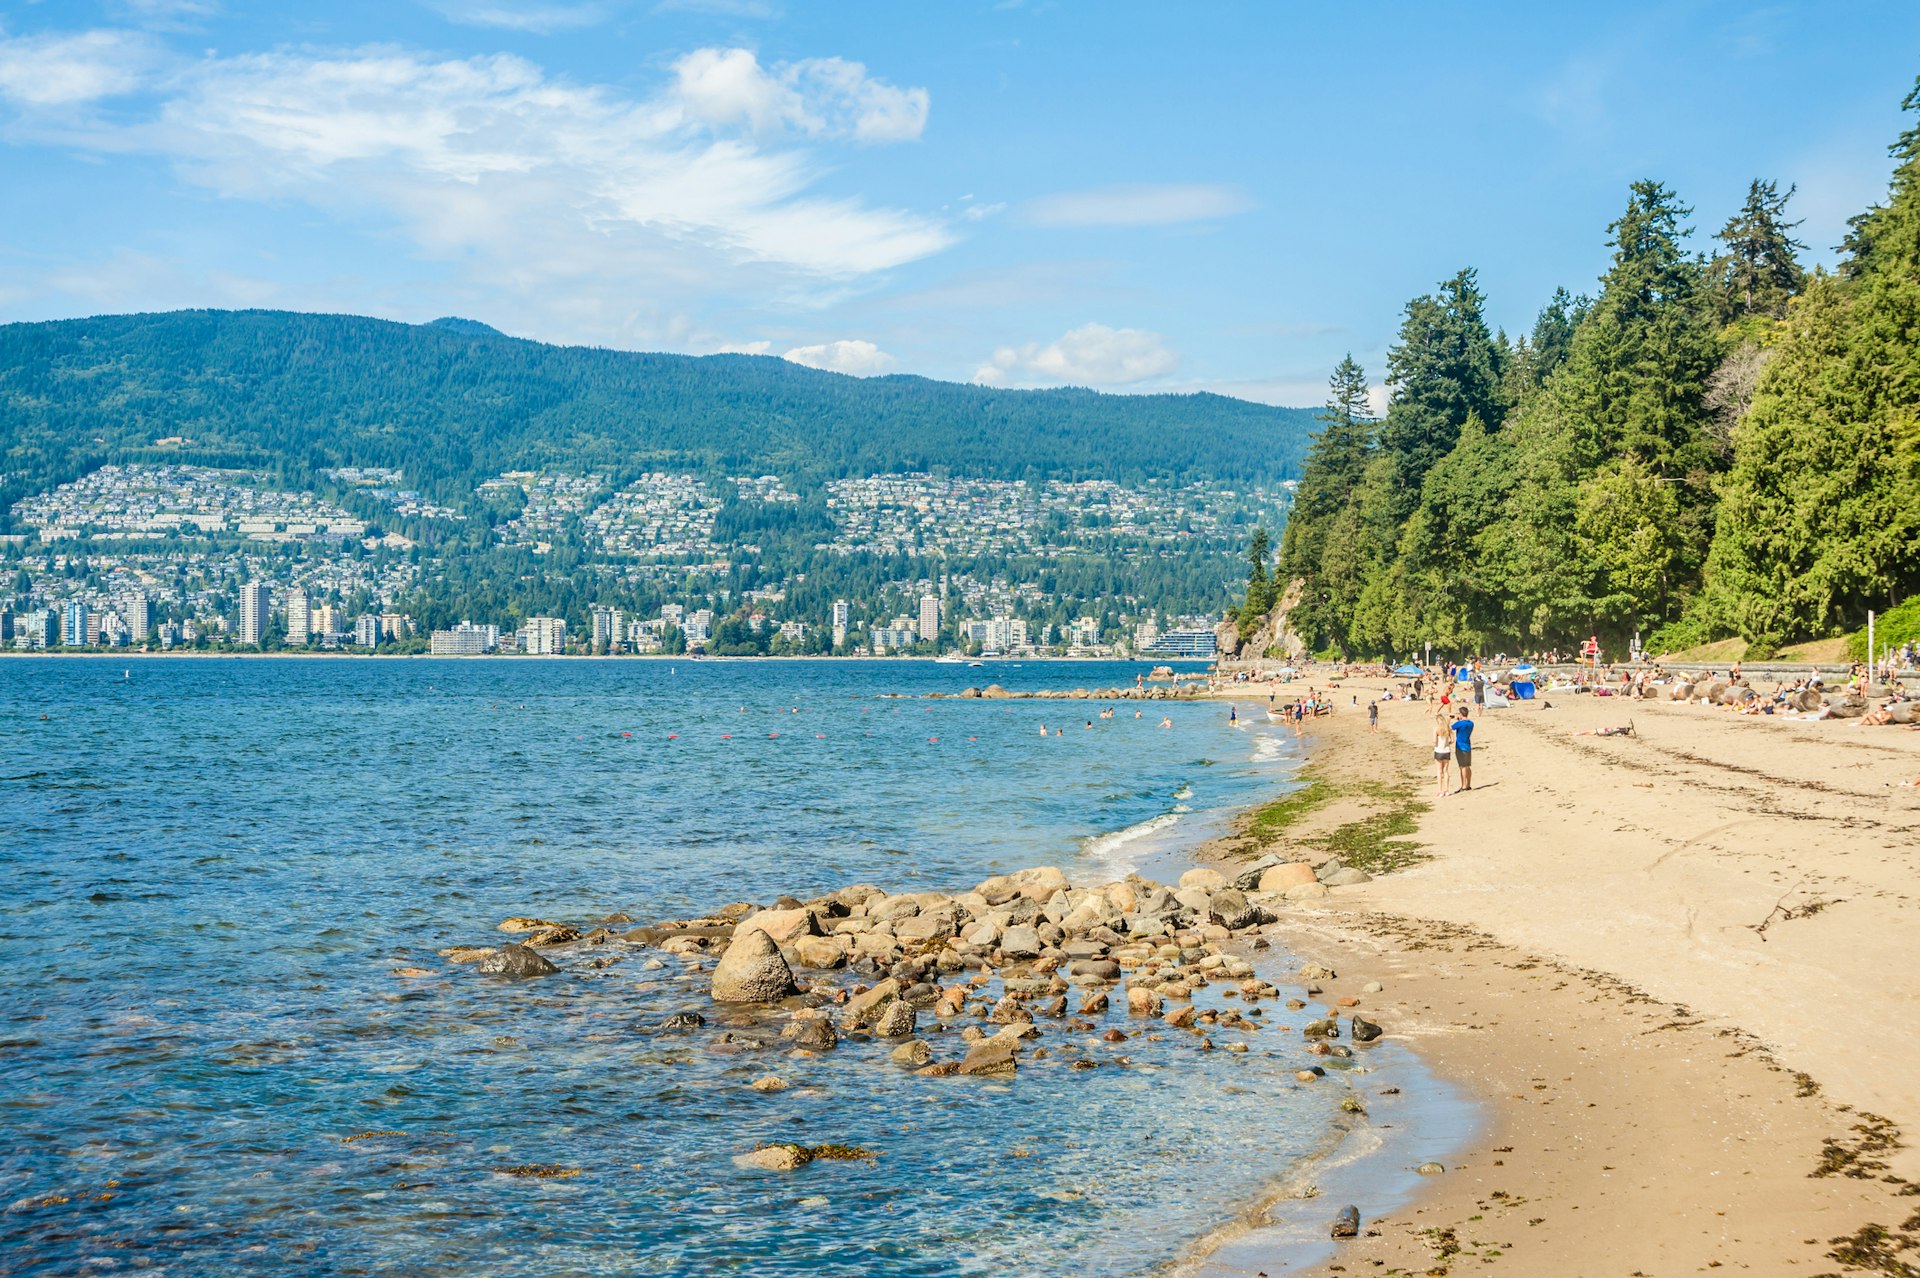 Third Beach at Stanley Park, a city public park in Vancouver